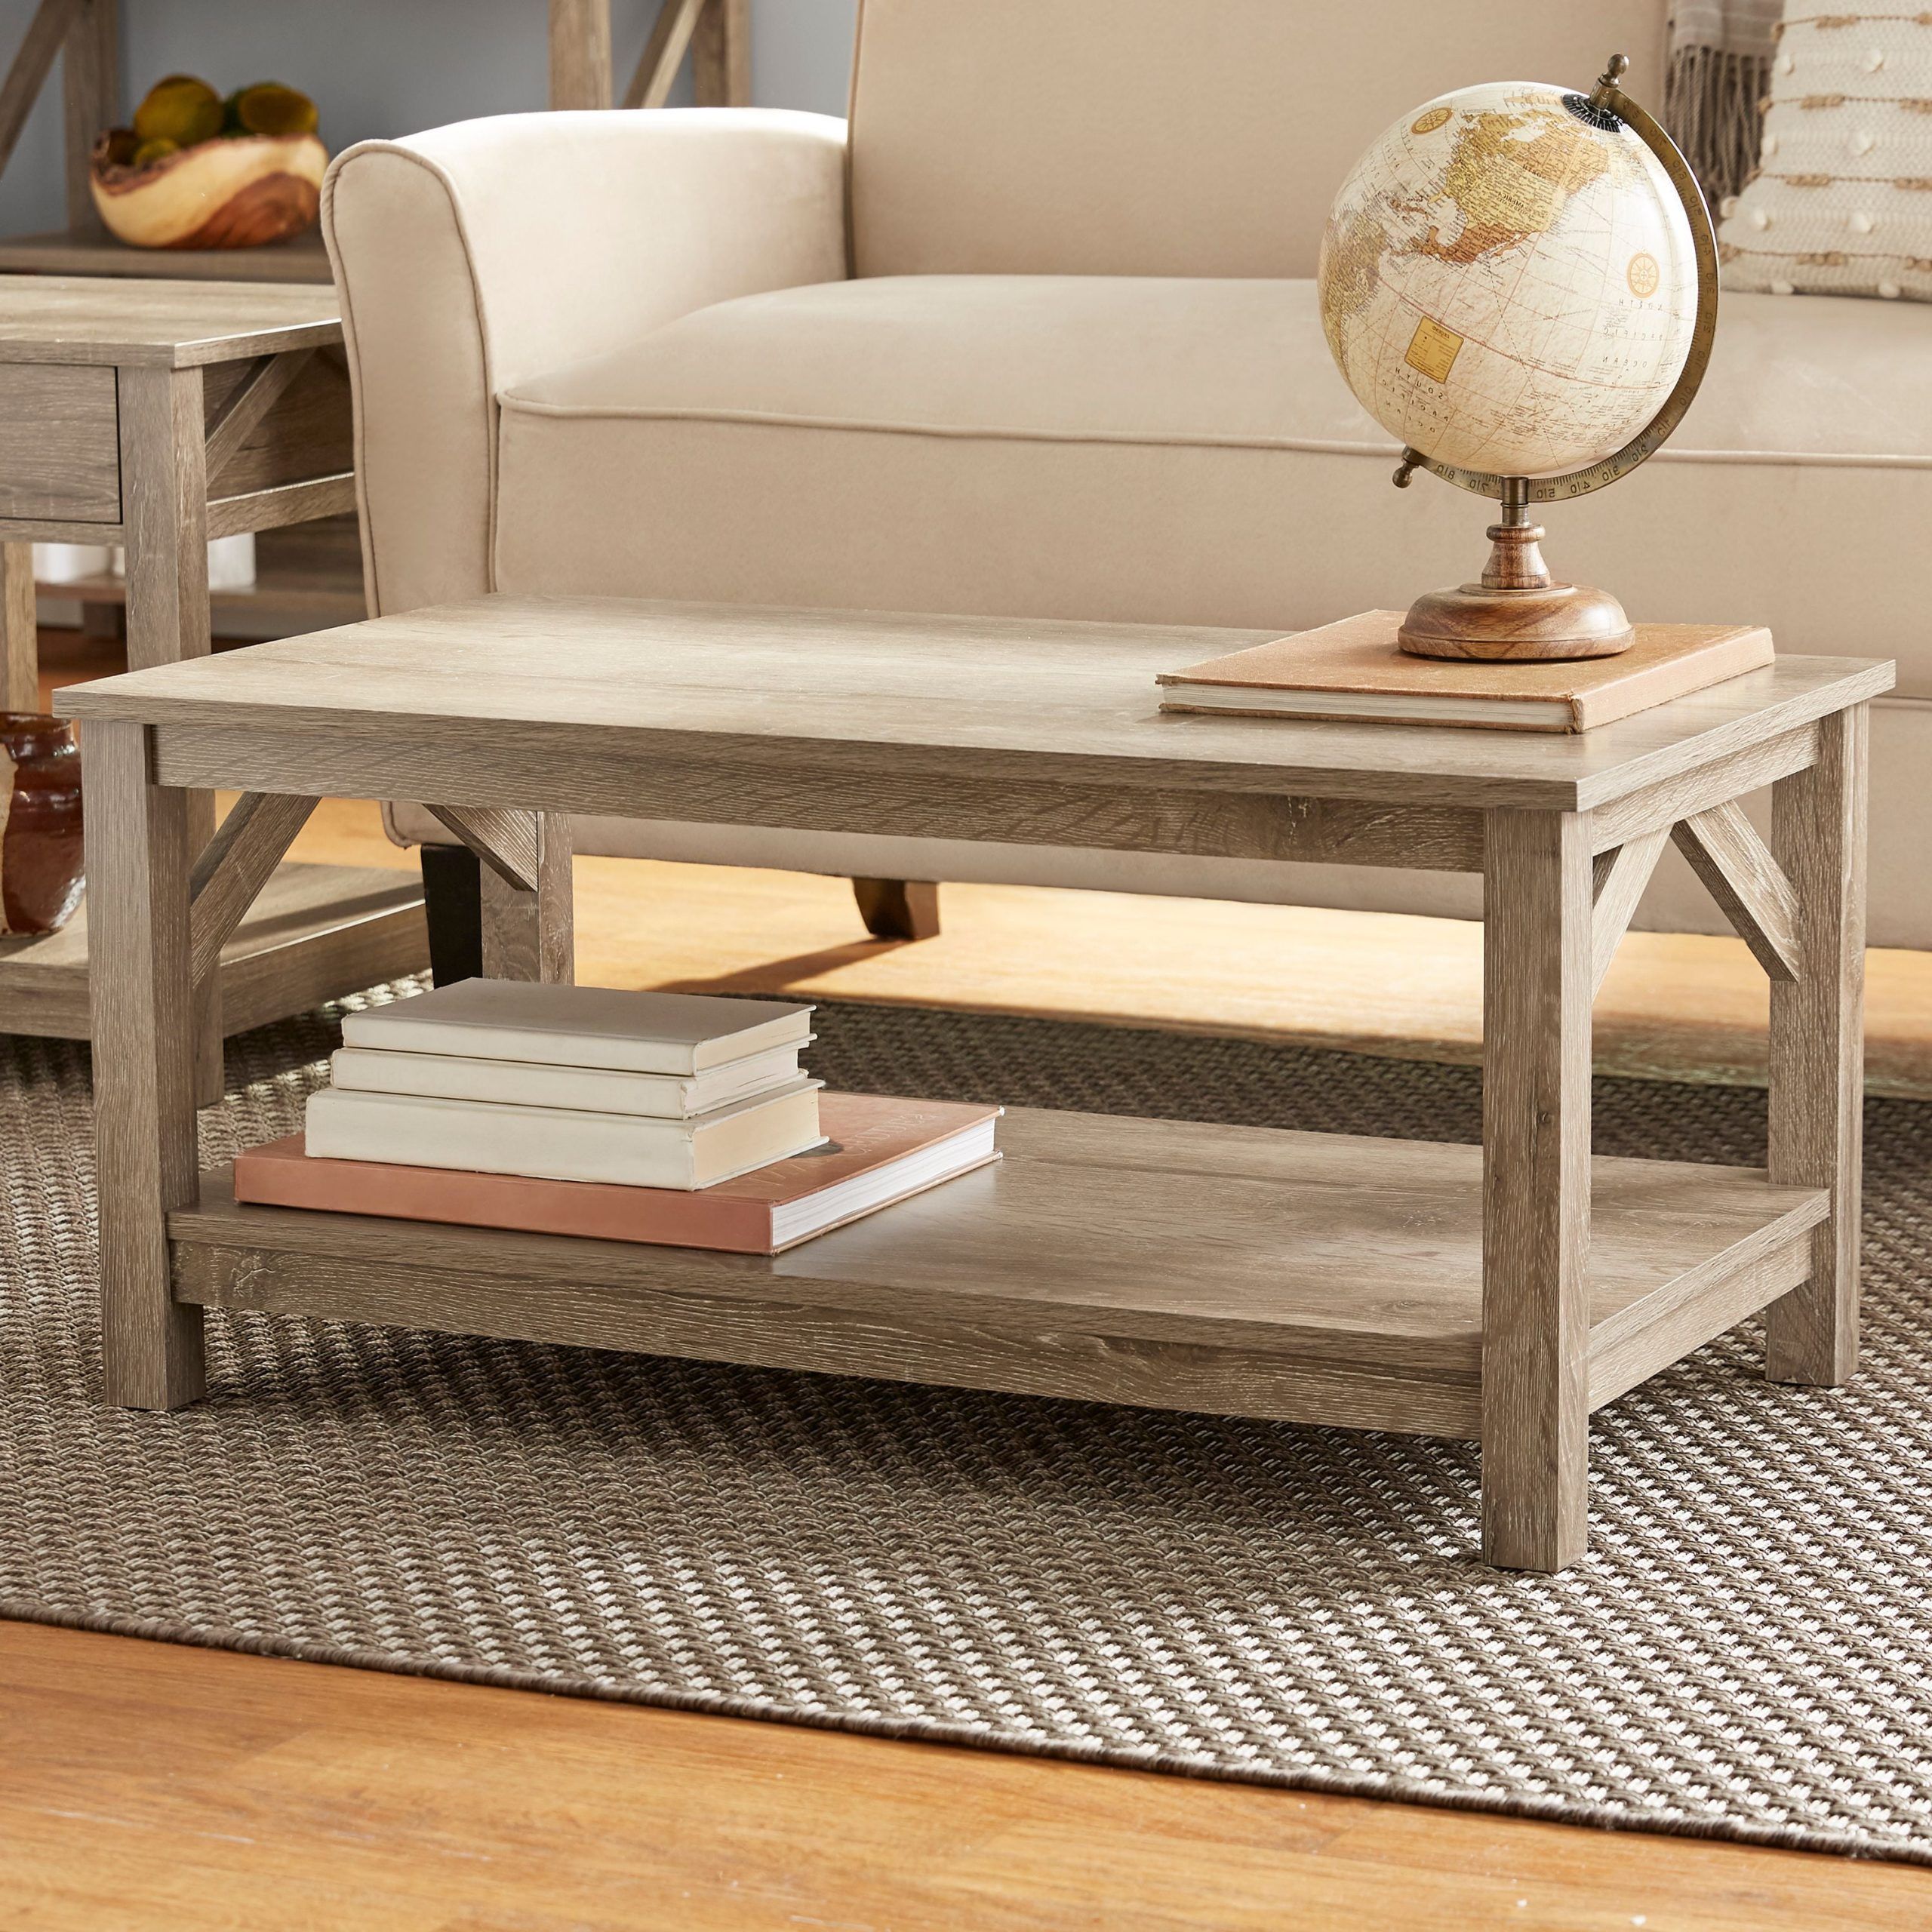 Recent Mainstays Aston Mills Rustic Farmhouse Coffee Table, Rustic Brown Inside Rustic Coffee Tables (View 2 of 15)